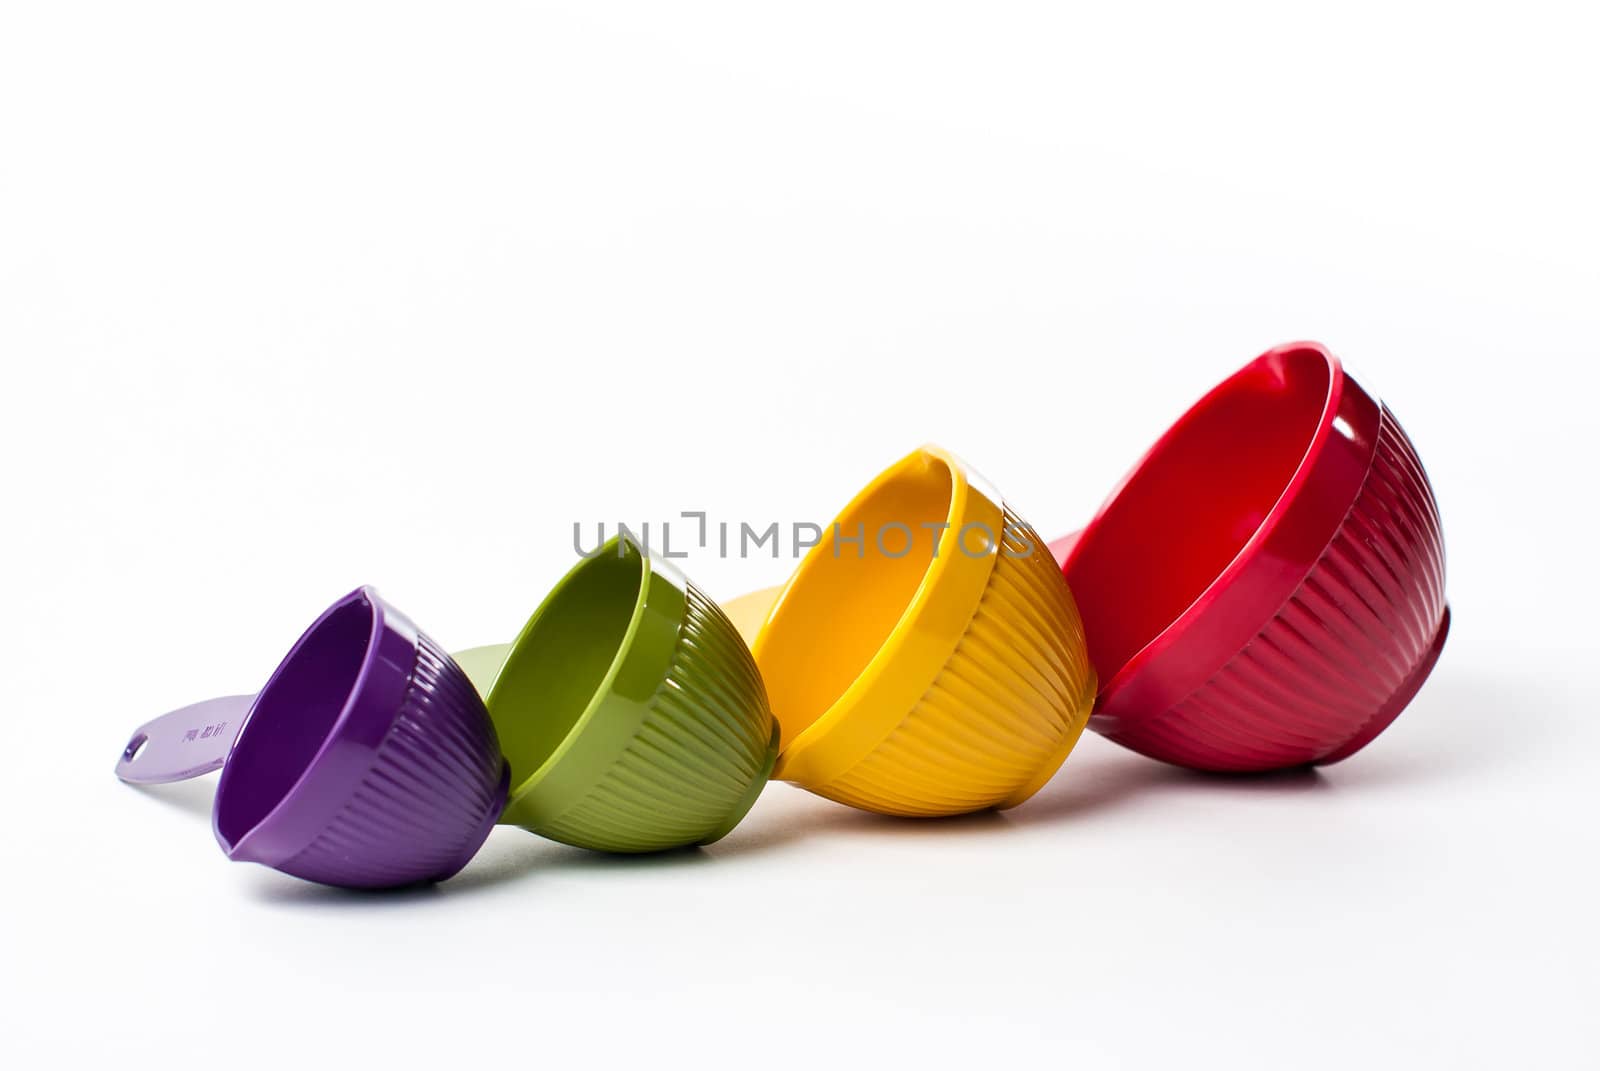 Colorful Measuring Cups in Increasing Size on White by oliverjw